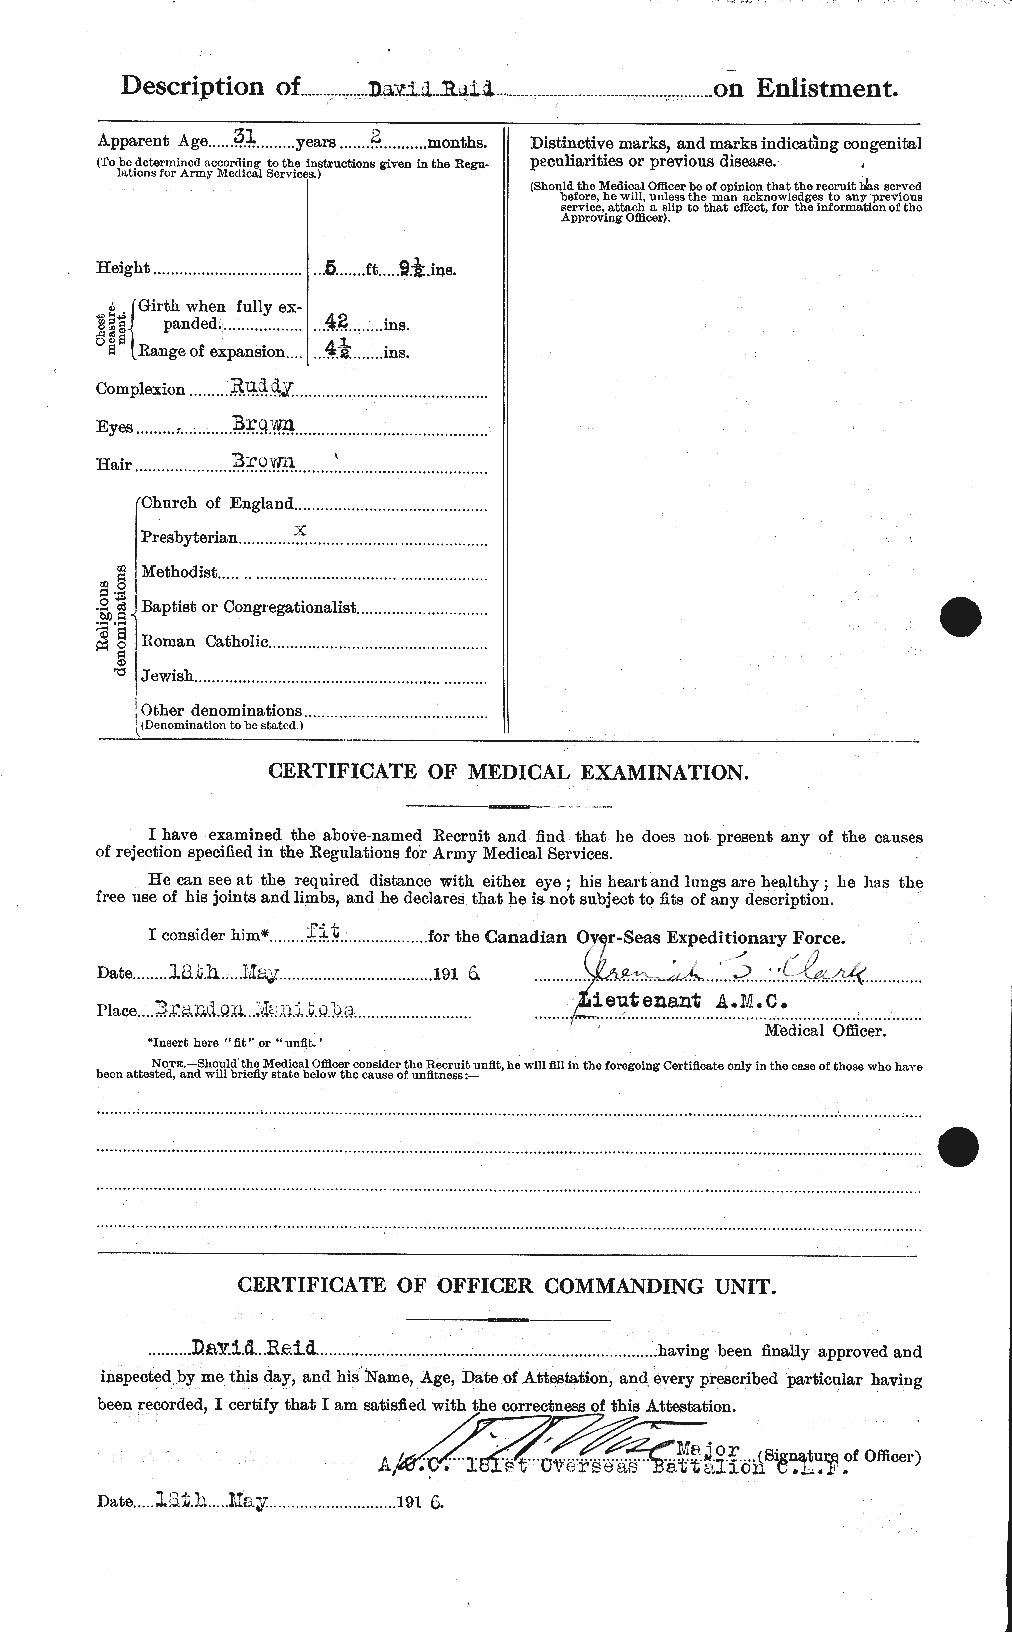 Personnel Records of the First World War - CEF 597927b